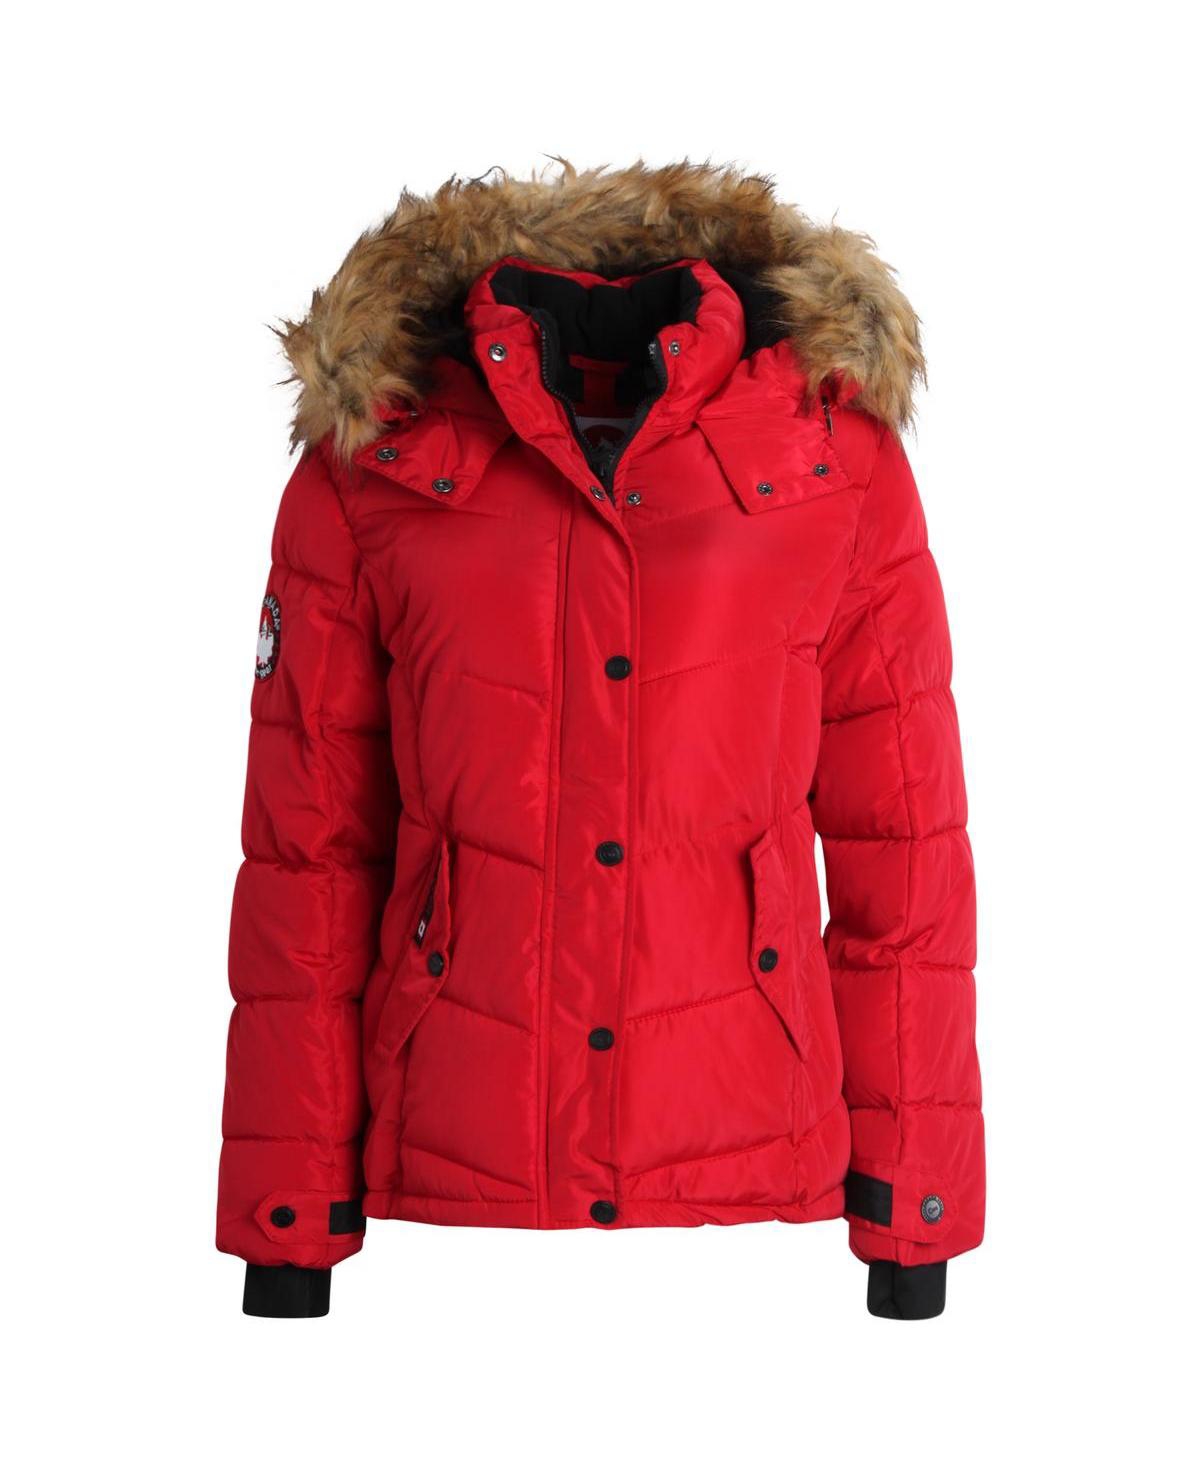 Women's Faux Fur Trim Insulated Puffer Jacket - Red